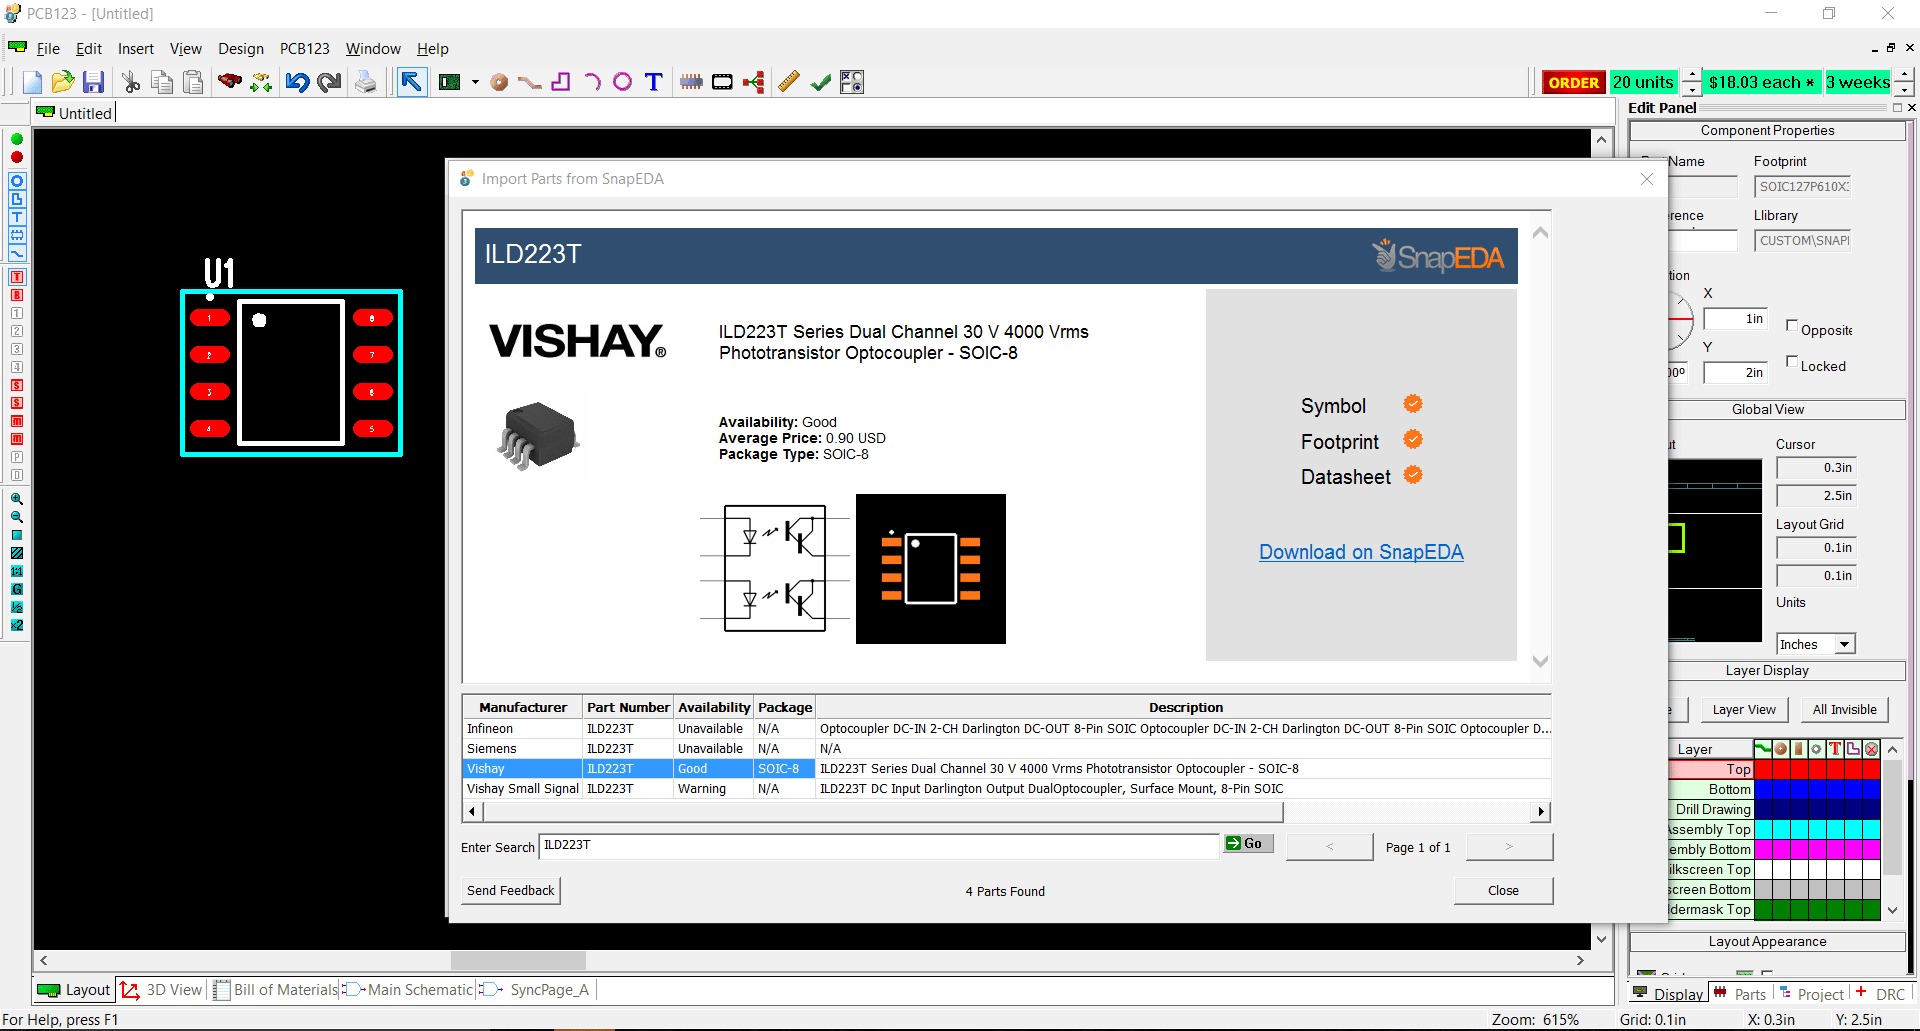 Designers Can Now Search SnapEDA’s Vast Component Library Directly in PCB123